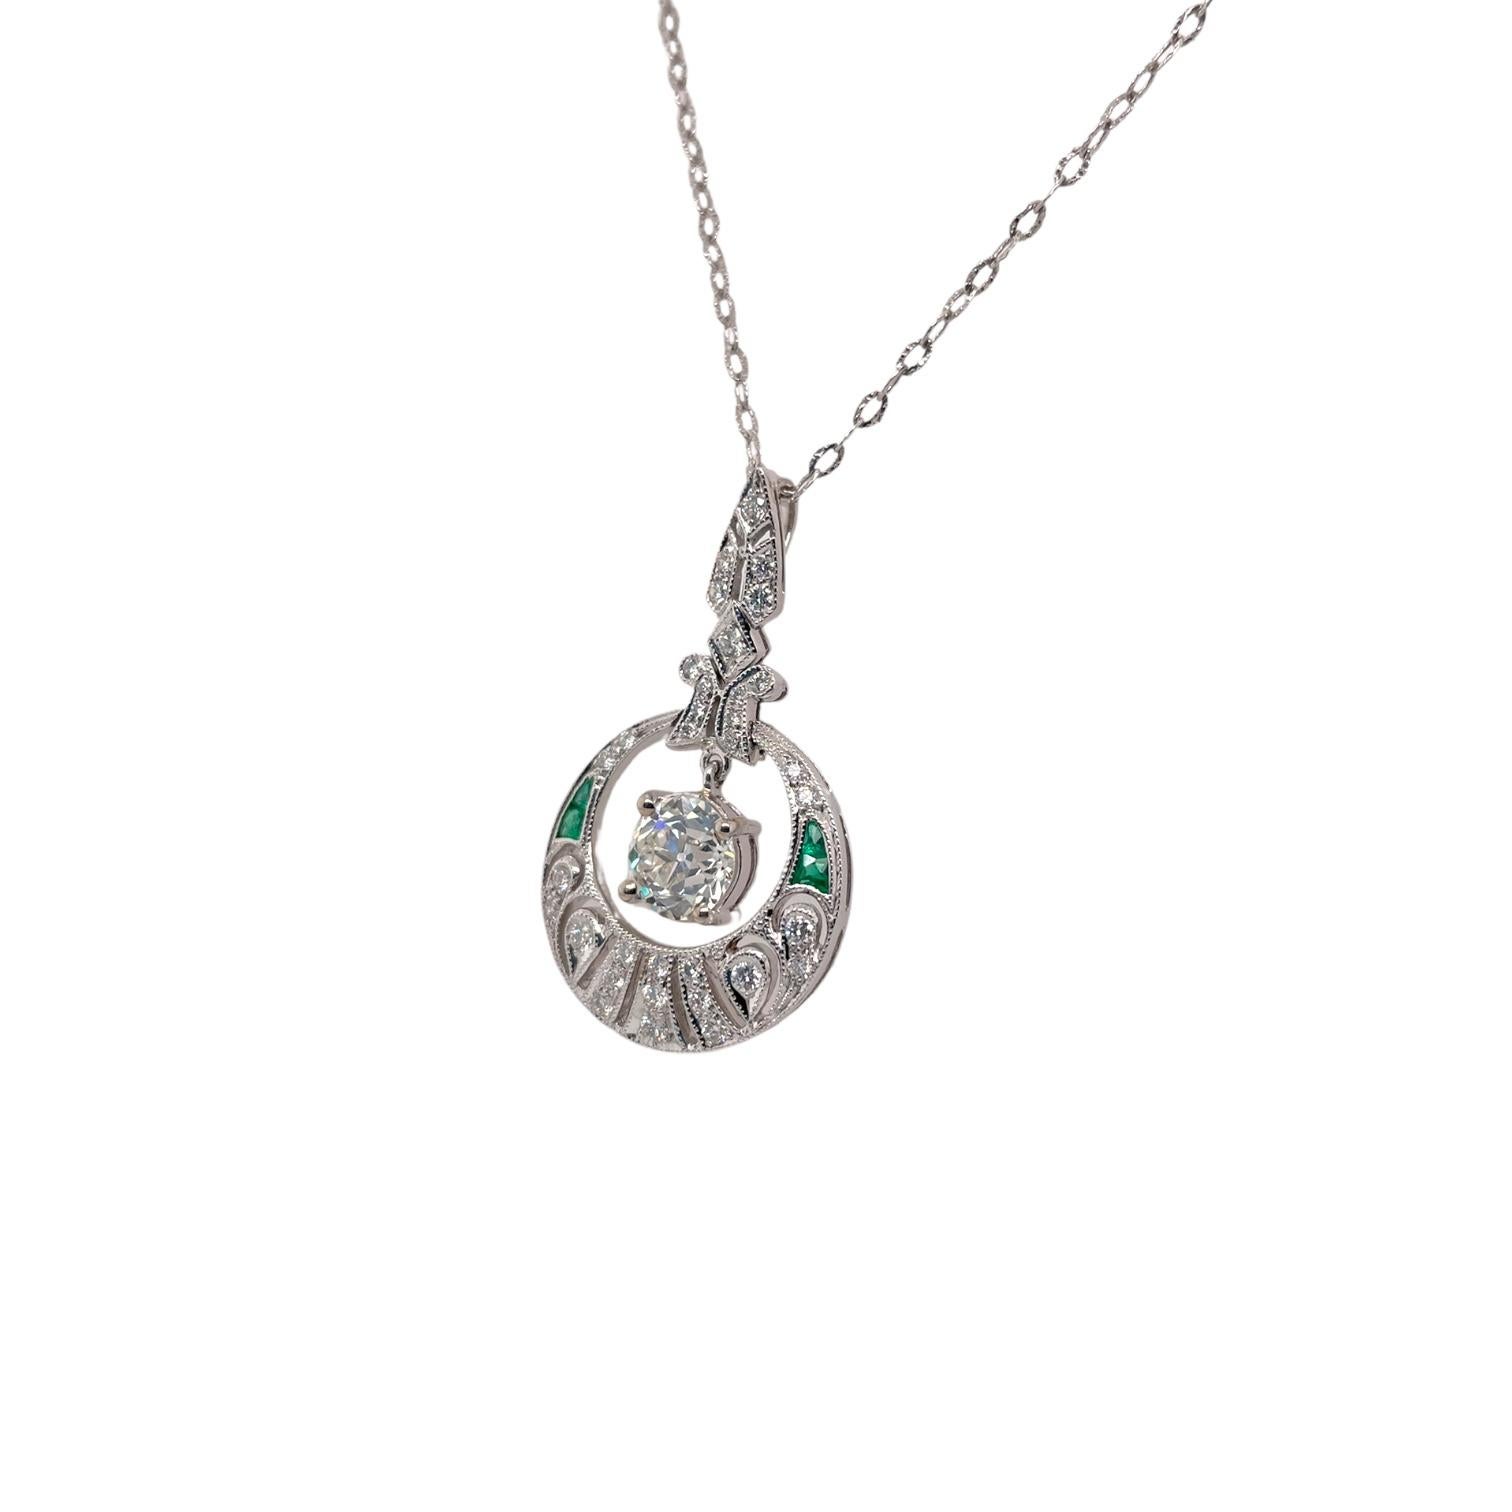 Pendant contains 1 center Old European cut diamond, 1.04ct. Diamond is set in a basket setting and hangs within an Art Deco style pendant containing 33 round brilliant diamonds, 0.35tcw and 4 fancy shape emeralds, 0.30tcw. Based on our opinion,